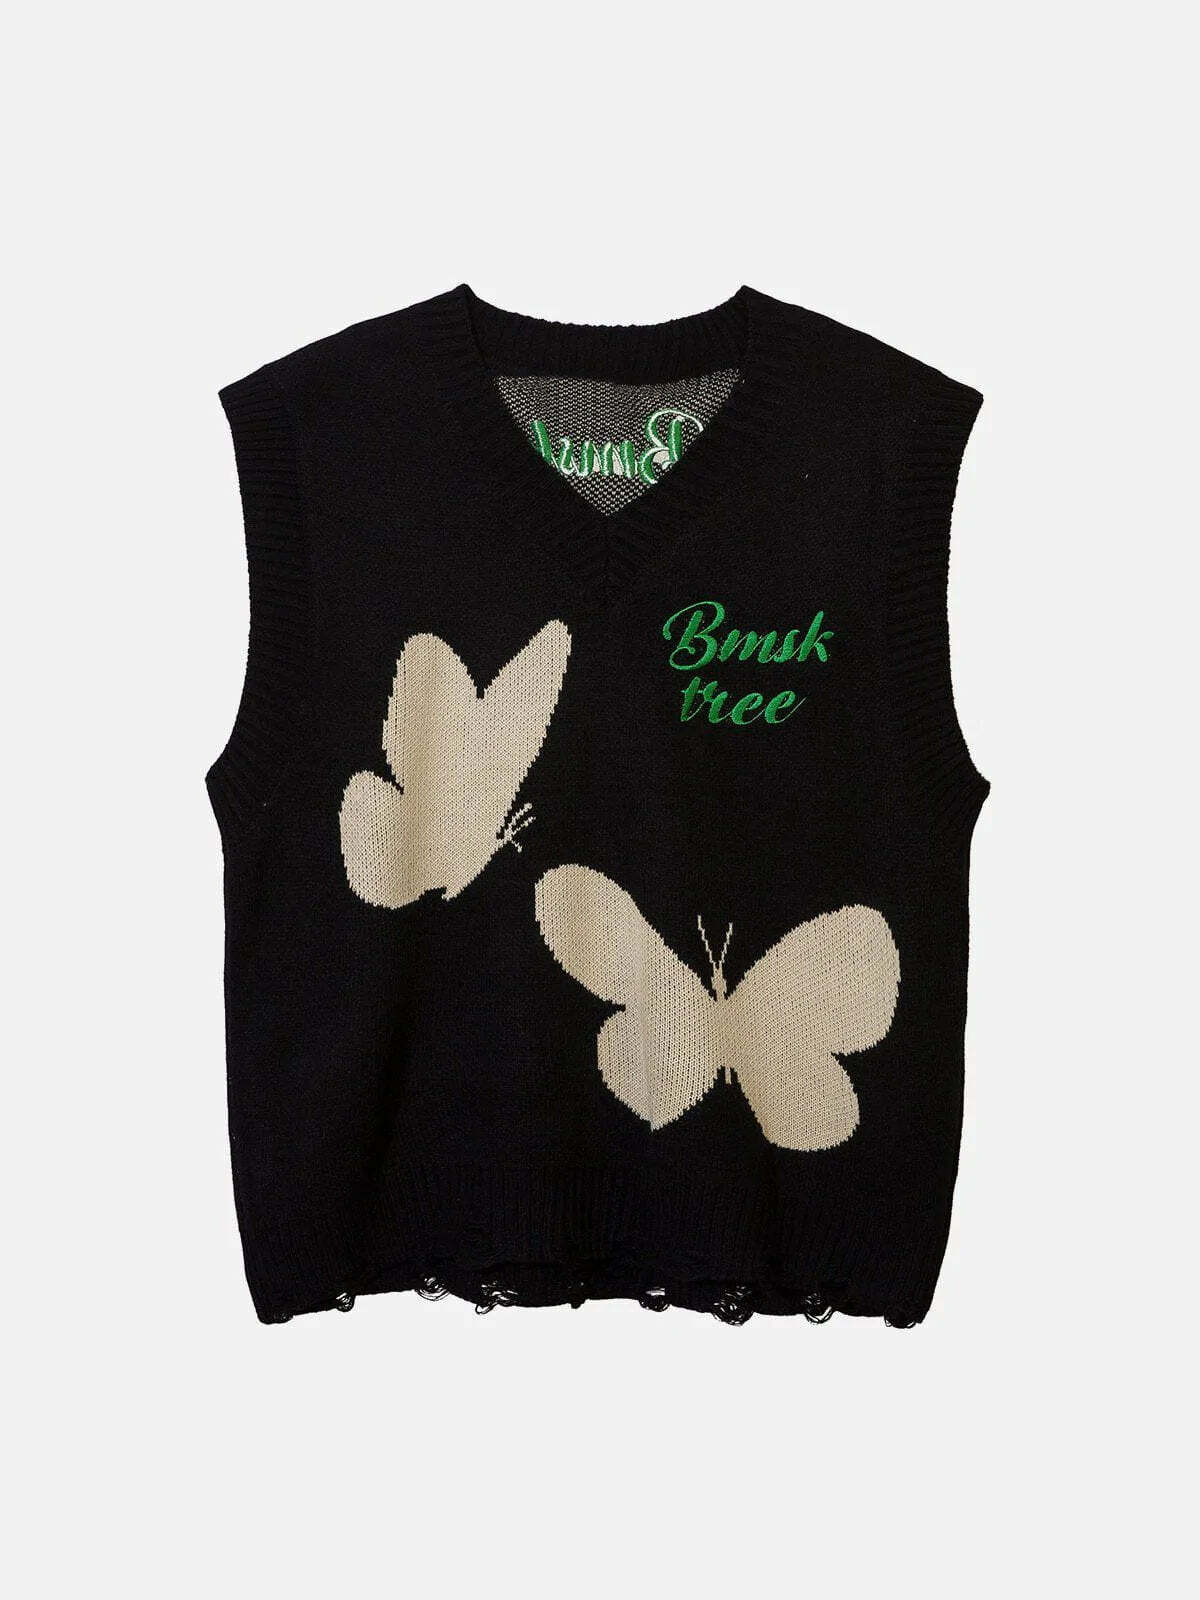 butterfly print sweater vest quirky y2k fashion essential 5051